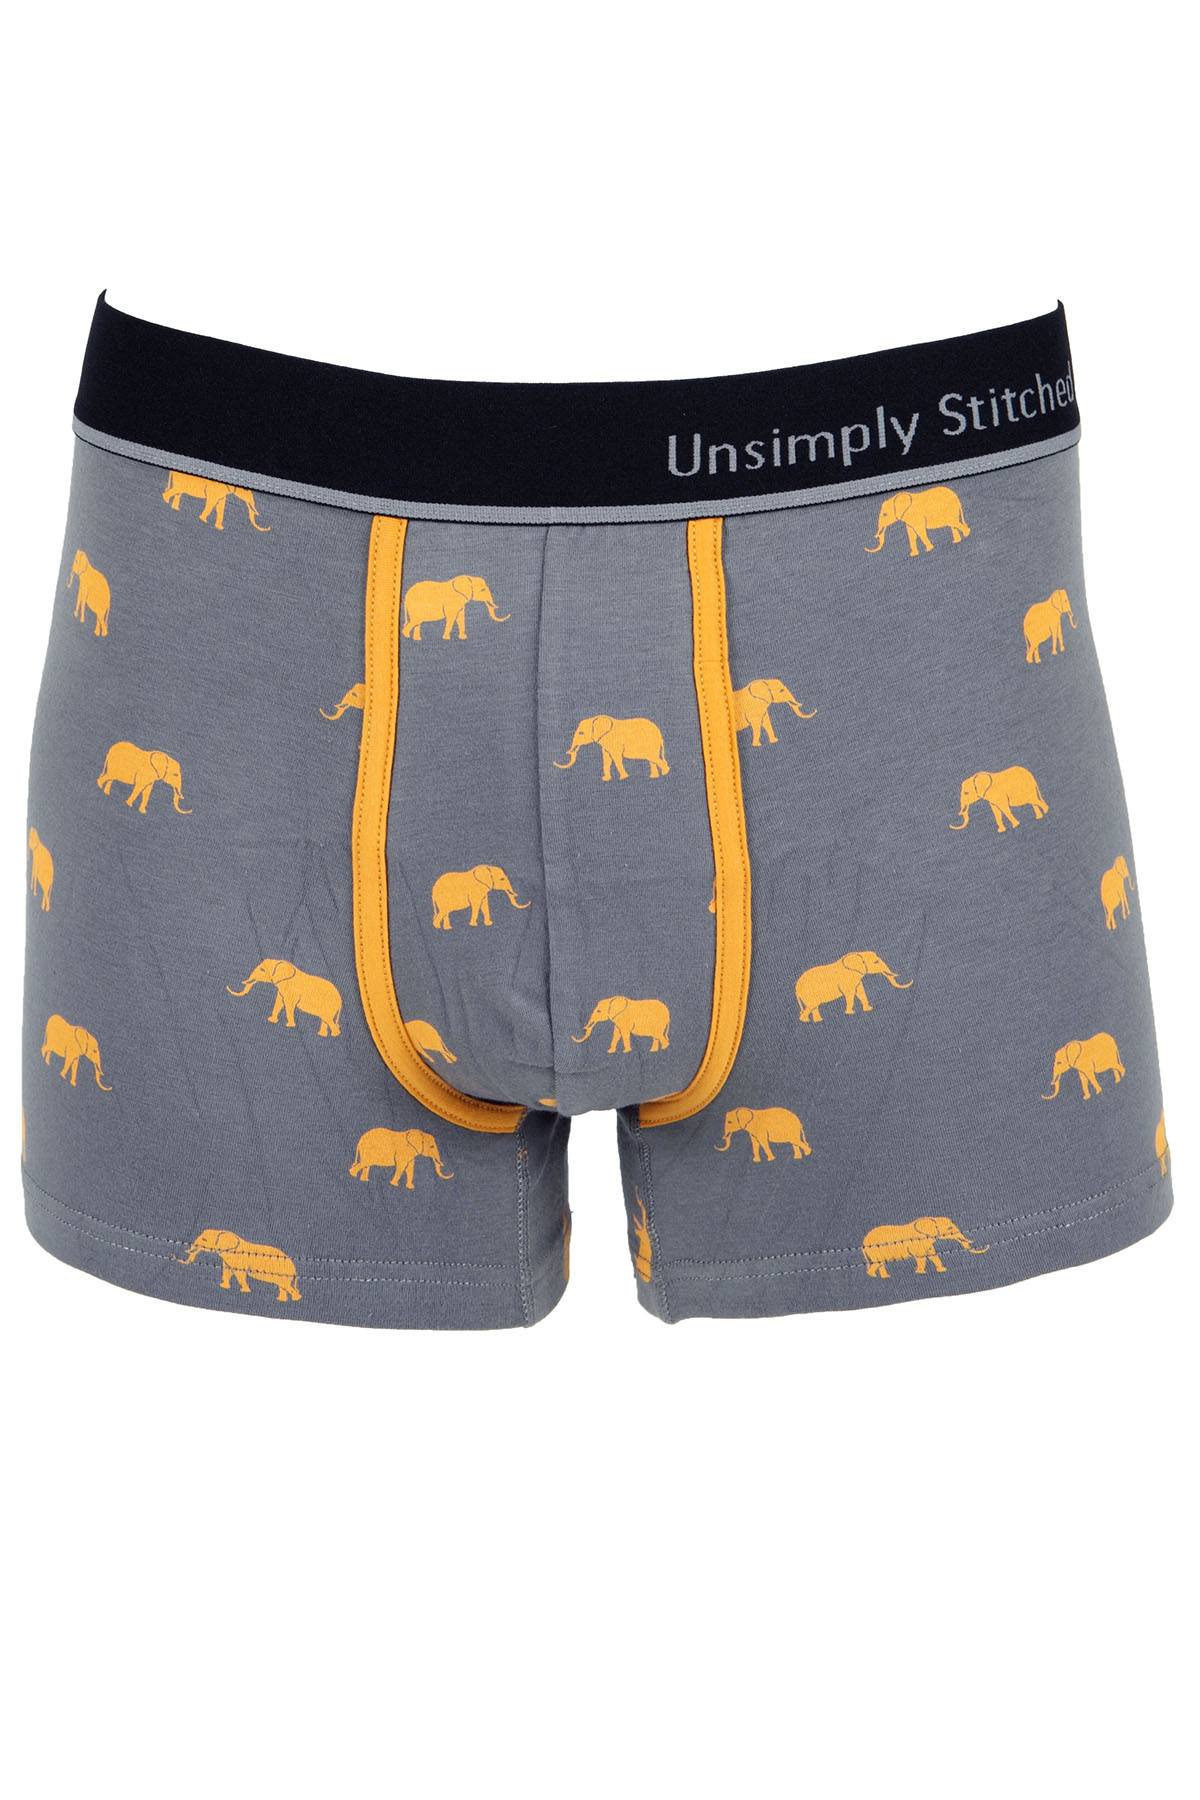 Unsimply Stitched Grey Elephant Trunk